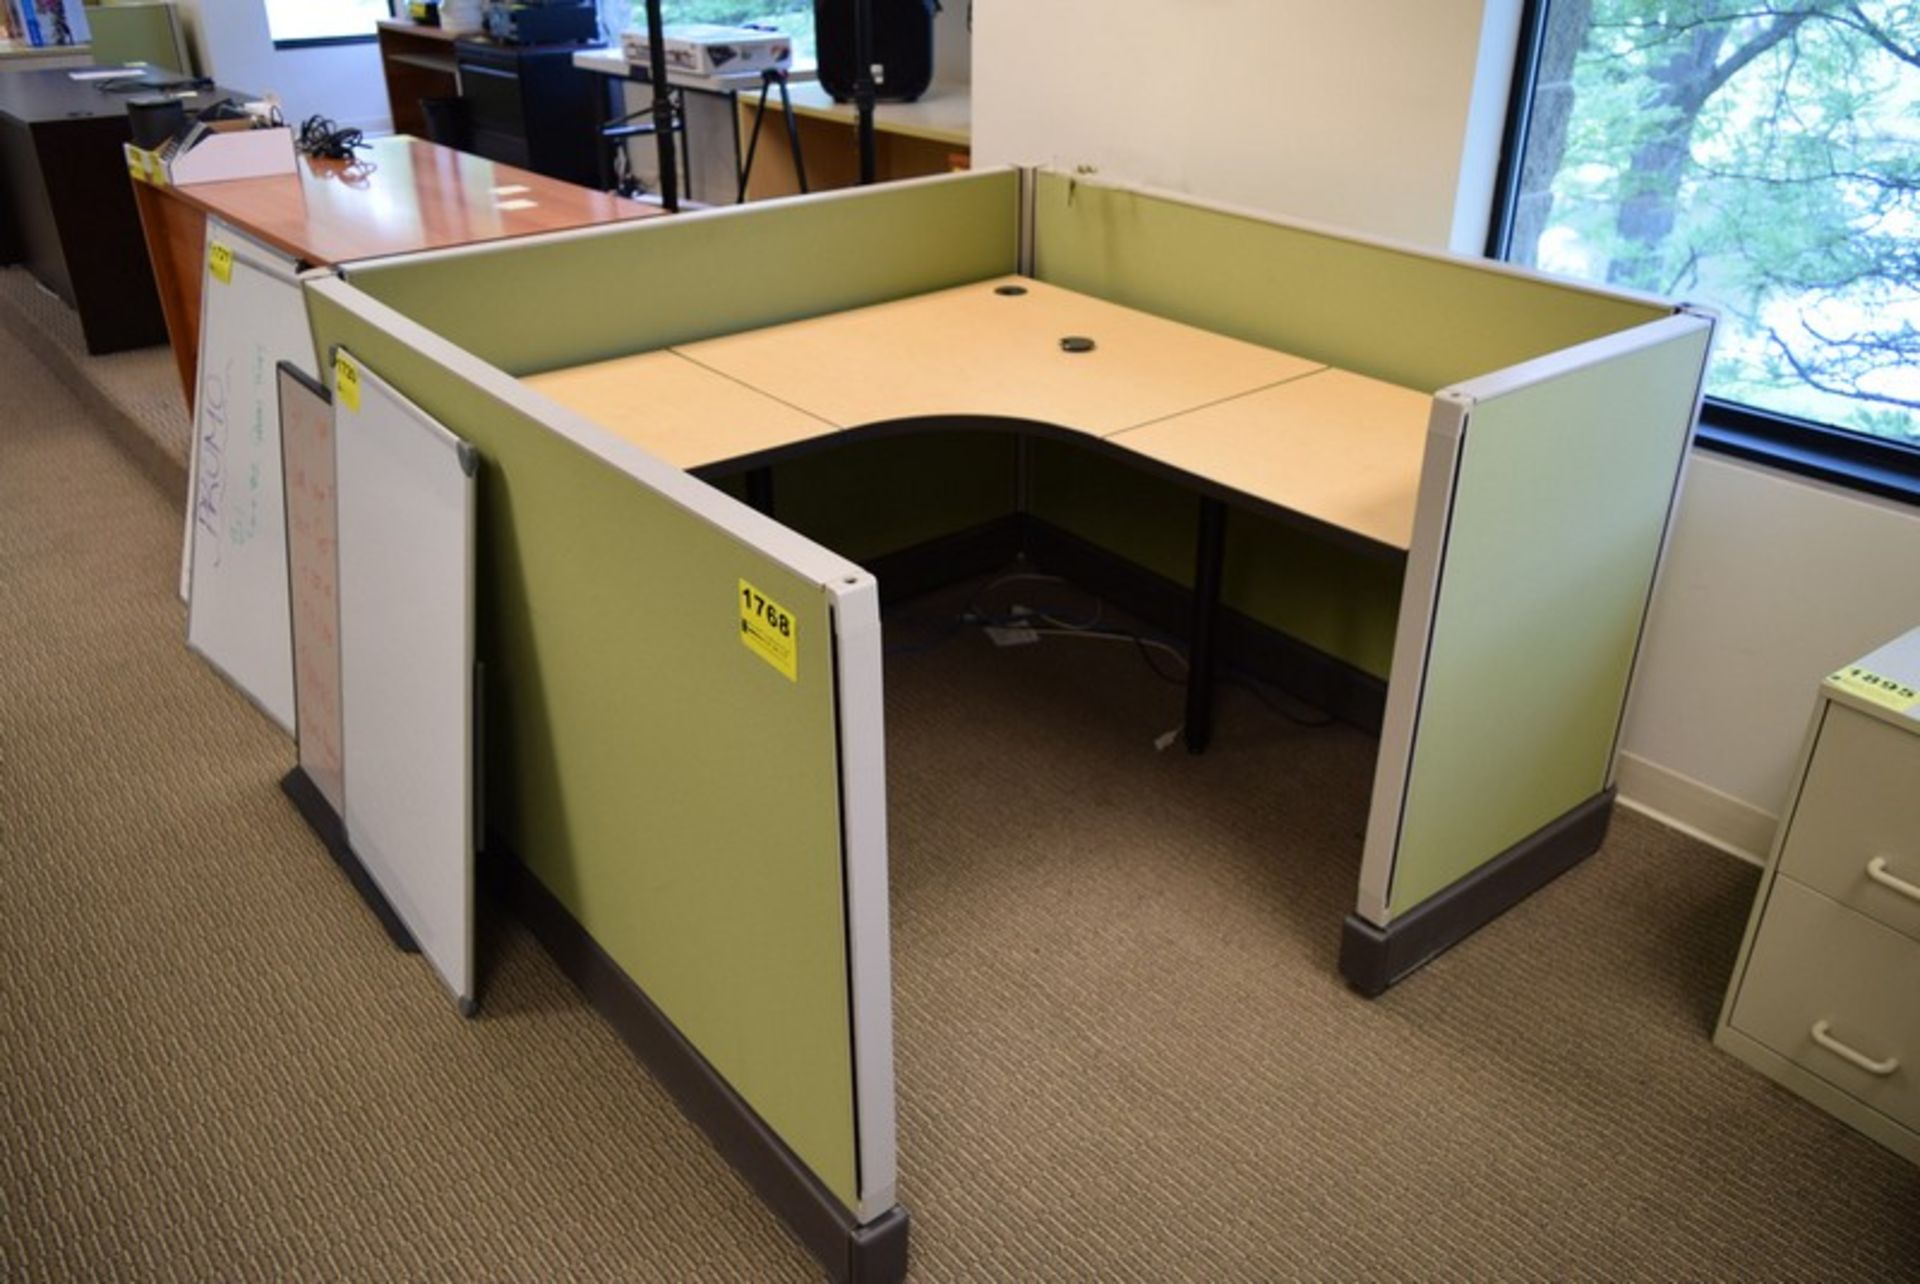 60" X 61" X 38" METAL FRAME CLOTH UPHOLSTERED POWERED OFFICE CUBICLE PARTITIONS W/ L-SHAPE DOUBLE